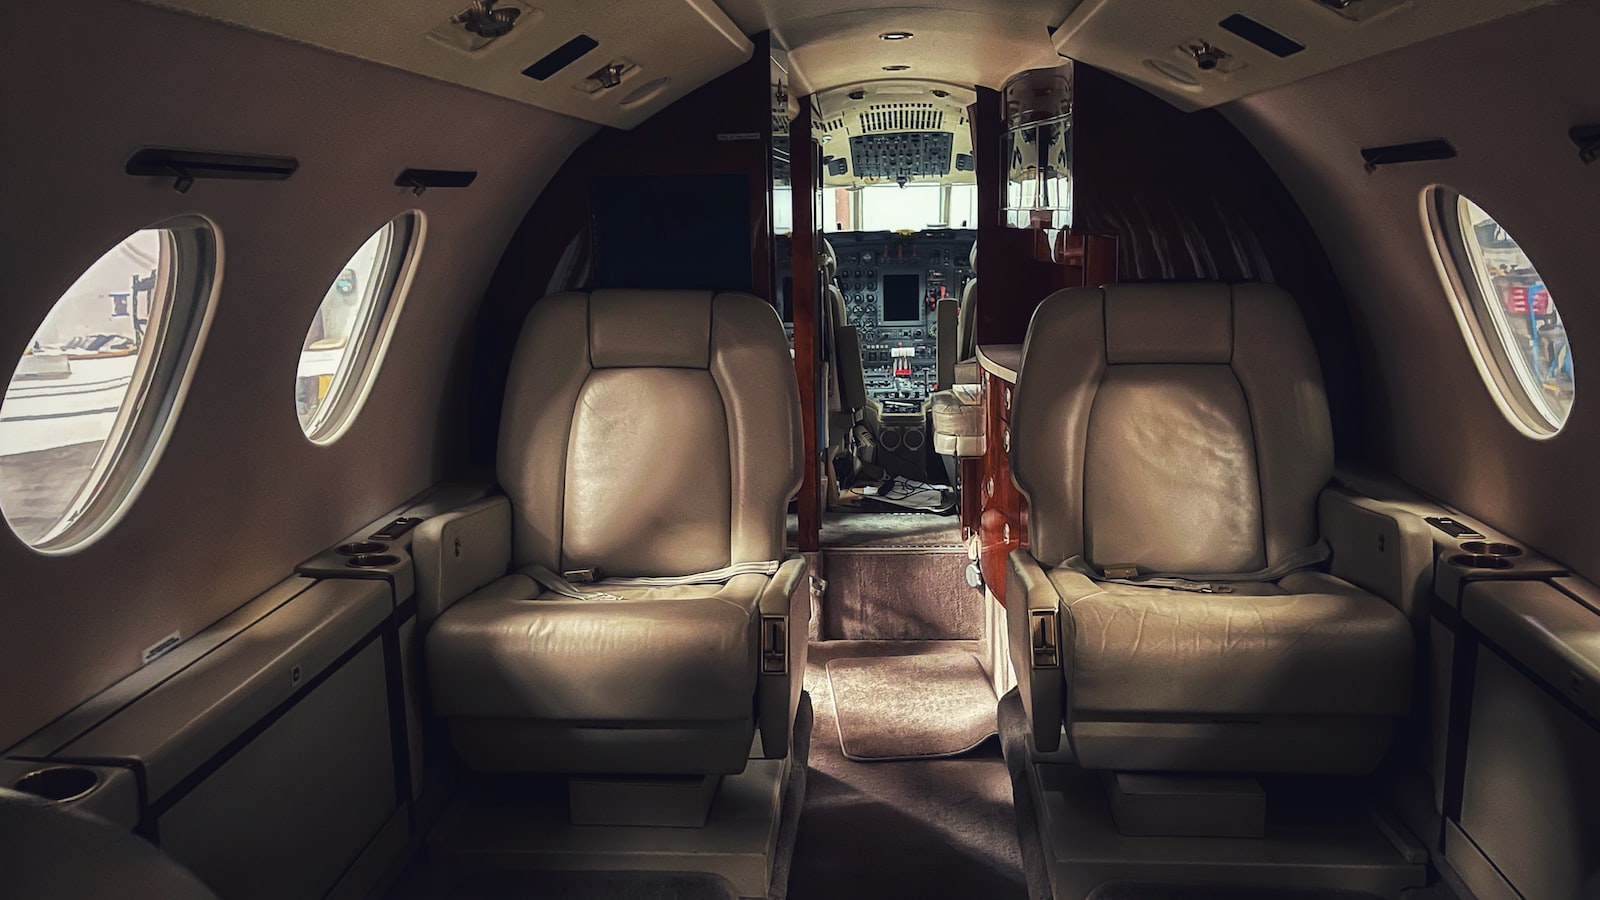 6. Exclusive Airborne Excellence: Considerations for Aspiring Private Jet Owners Seeking Unmatched Luxury